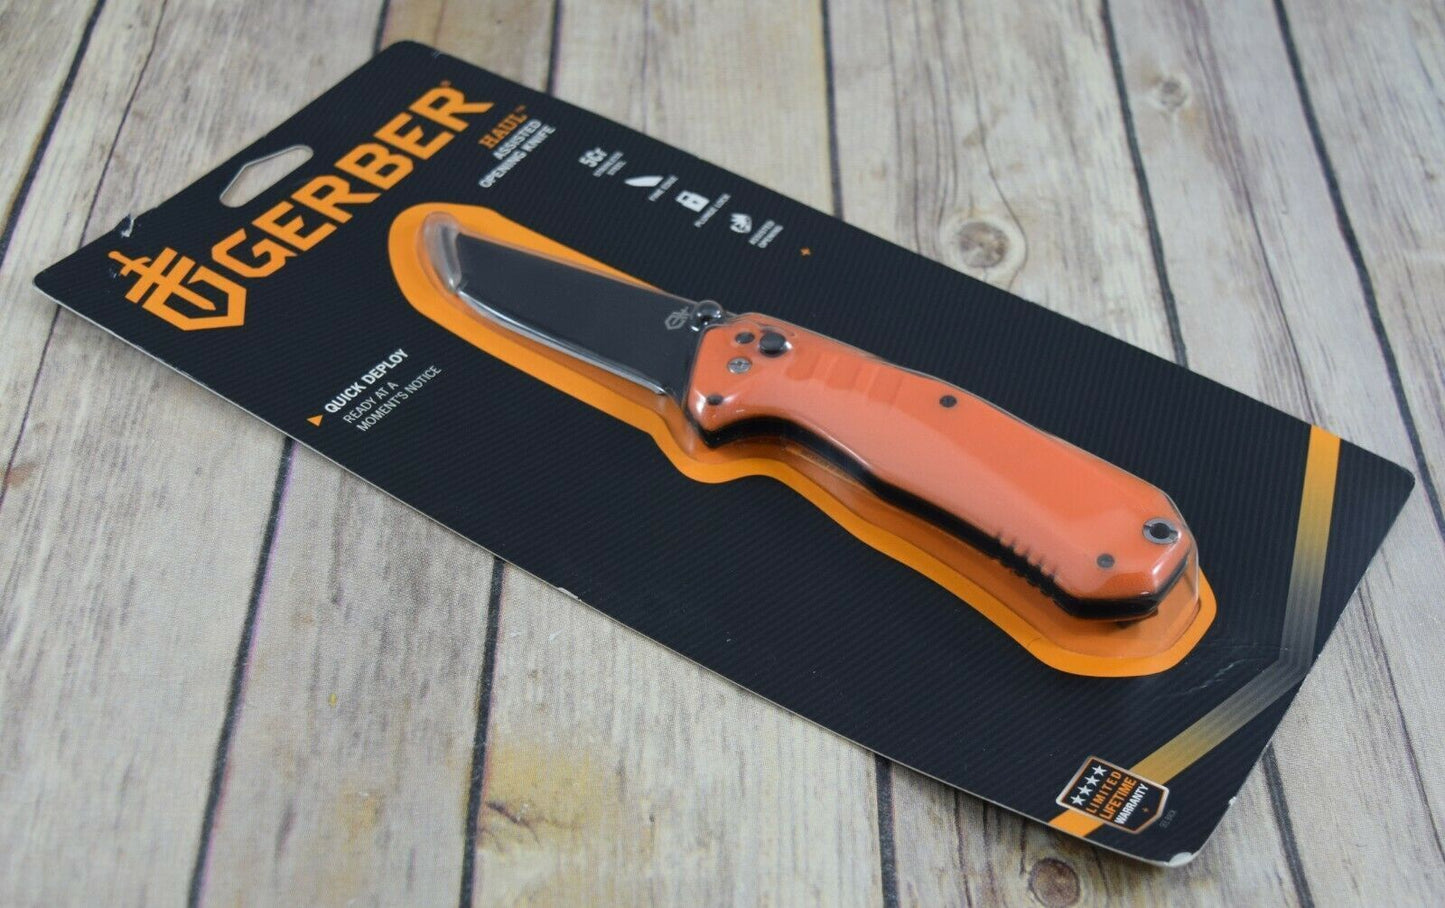 7.90 INCH GERBER HAUL AO OPEN KNIFE RAZOR SHARP BLADE (3) COLORS TO CHOOSE FROM